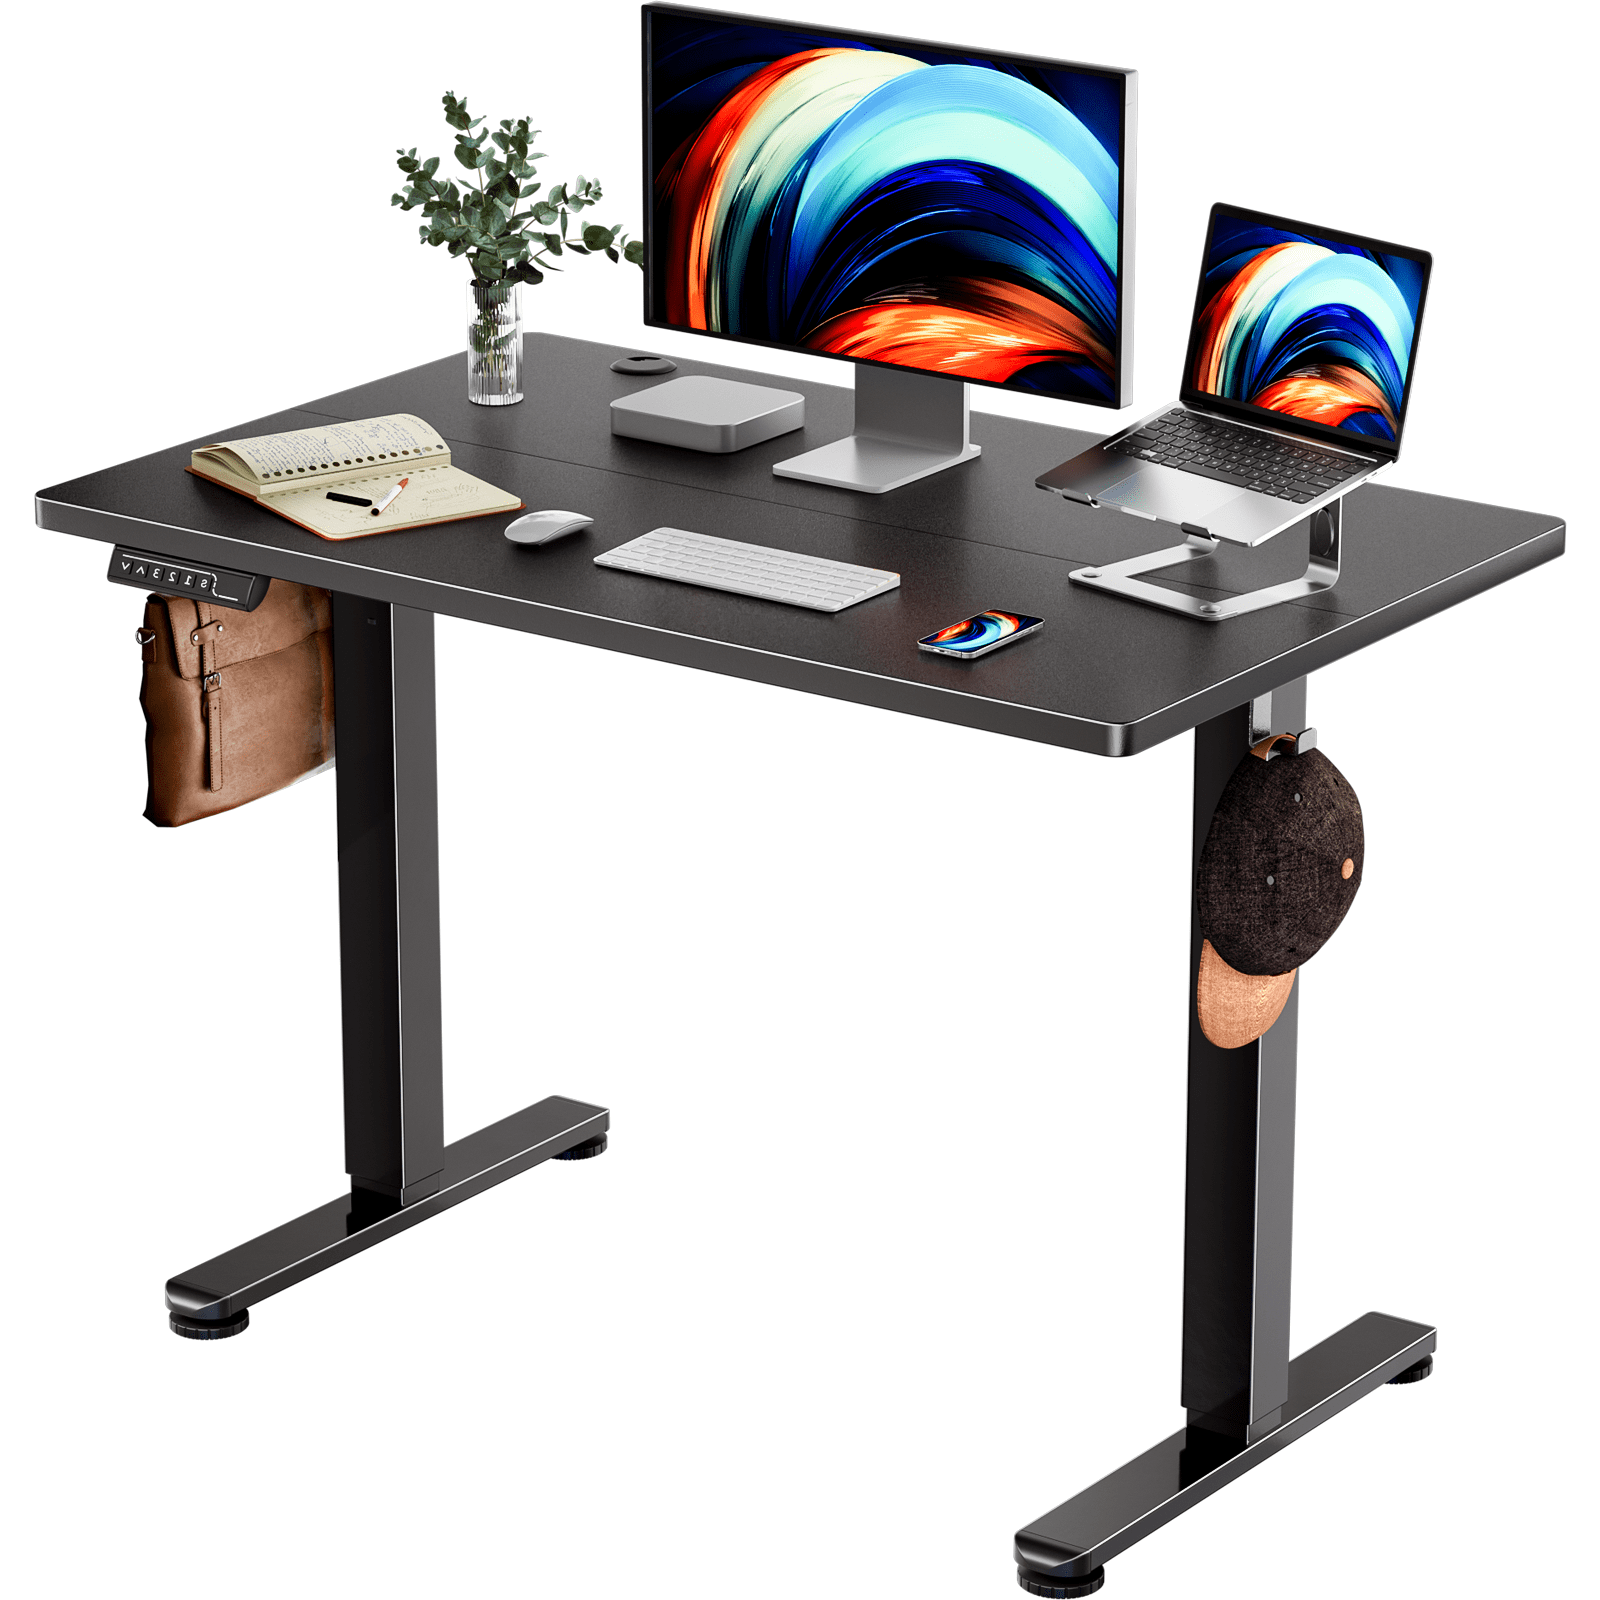 40-x-24-Electric-Standing-Desk-Height-Adjustable-Sit-Stand-up-Desk-with-3-Memory-Presets-for-Home-Office-Black_68a12455-bda6-4b9d-8c51-8cff2977d801.394cbbfe0d0ef477ce633d974091ede8.png?odnHeight=2000&odnWidth=2000&odnBg=FFFFFF